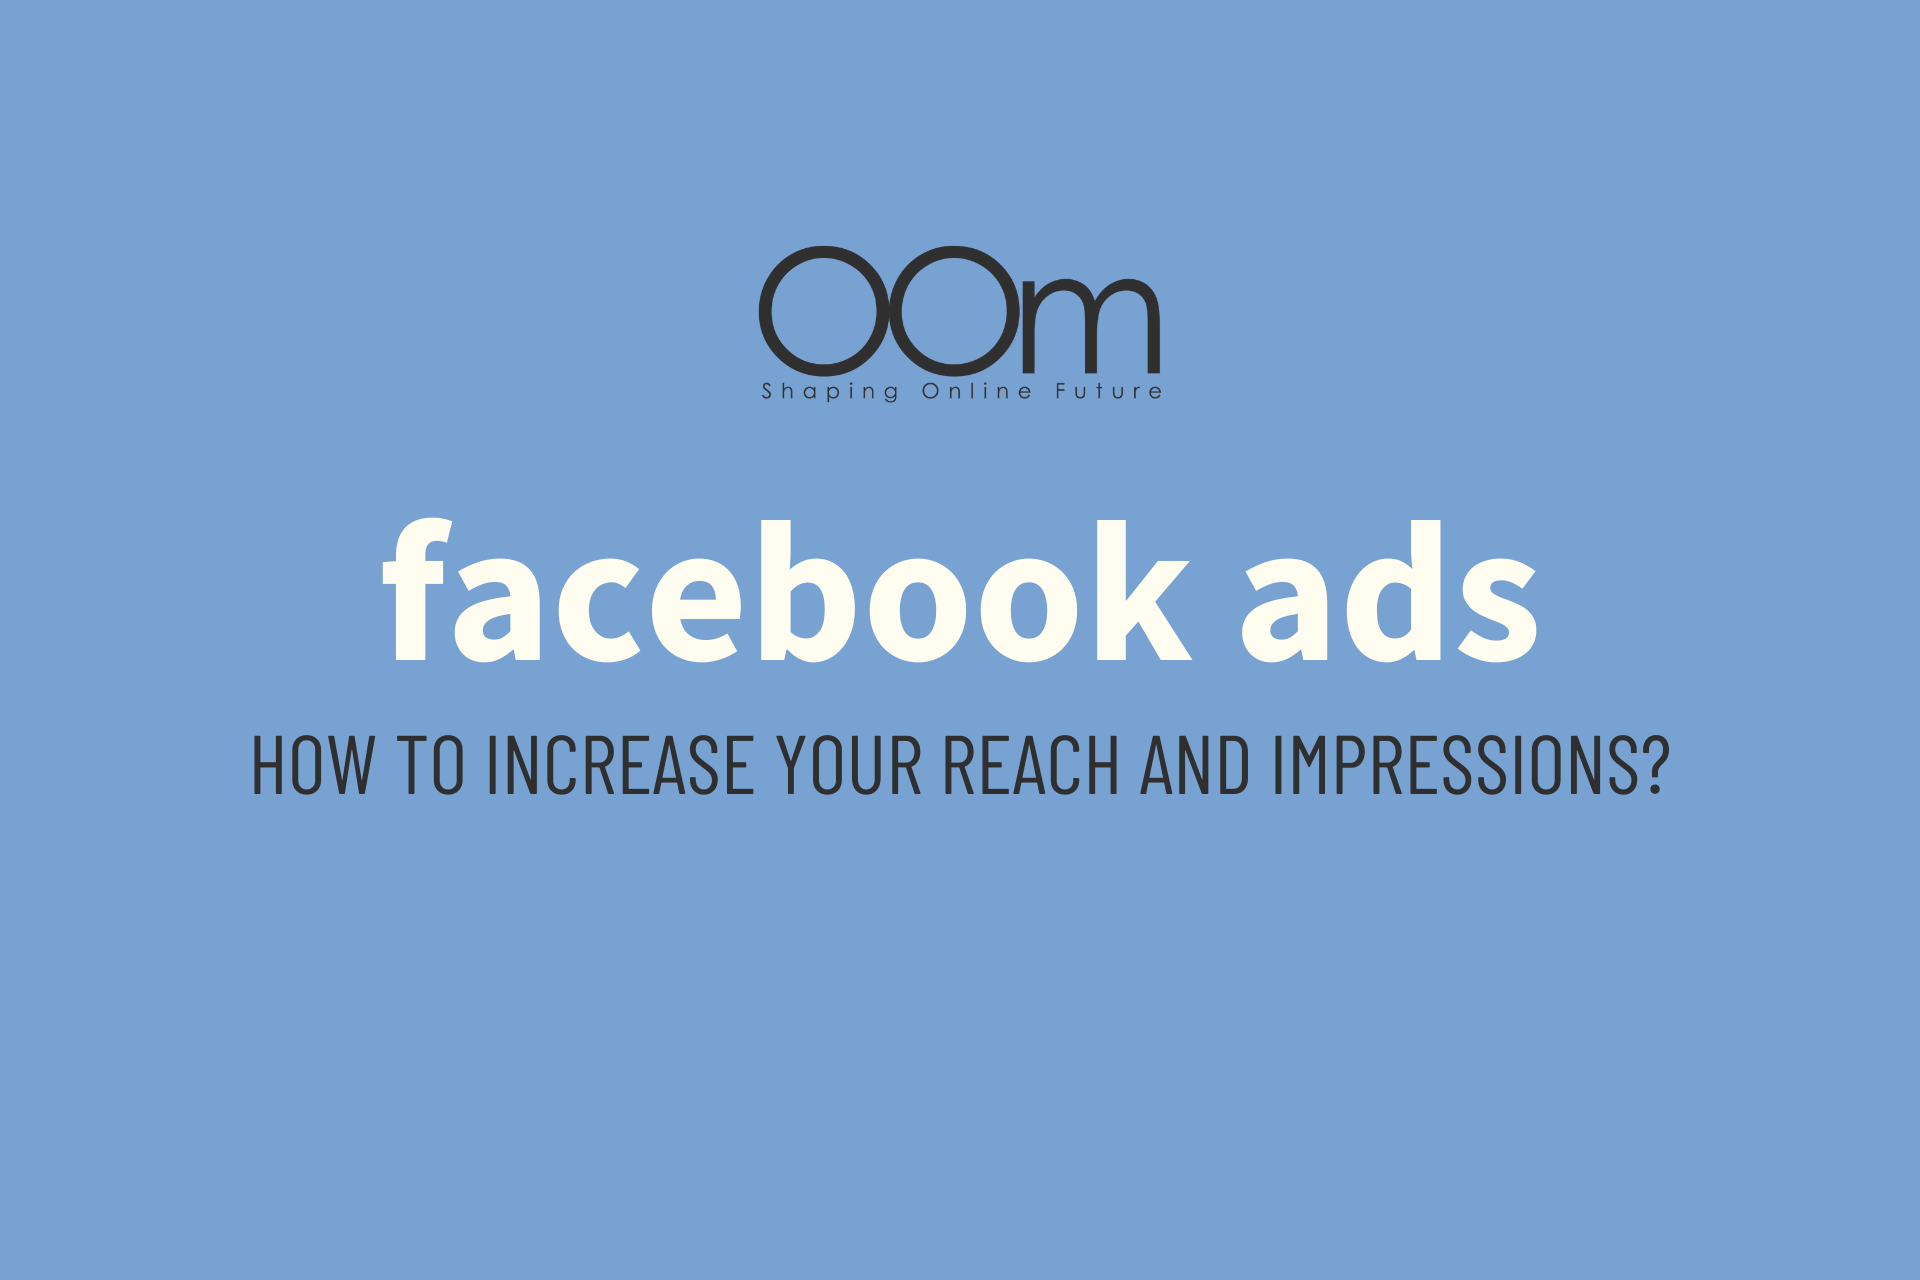 How To Increase The Impression And Reach Of Your Facebook Ads